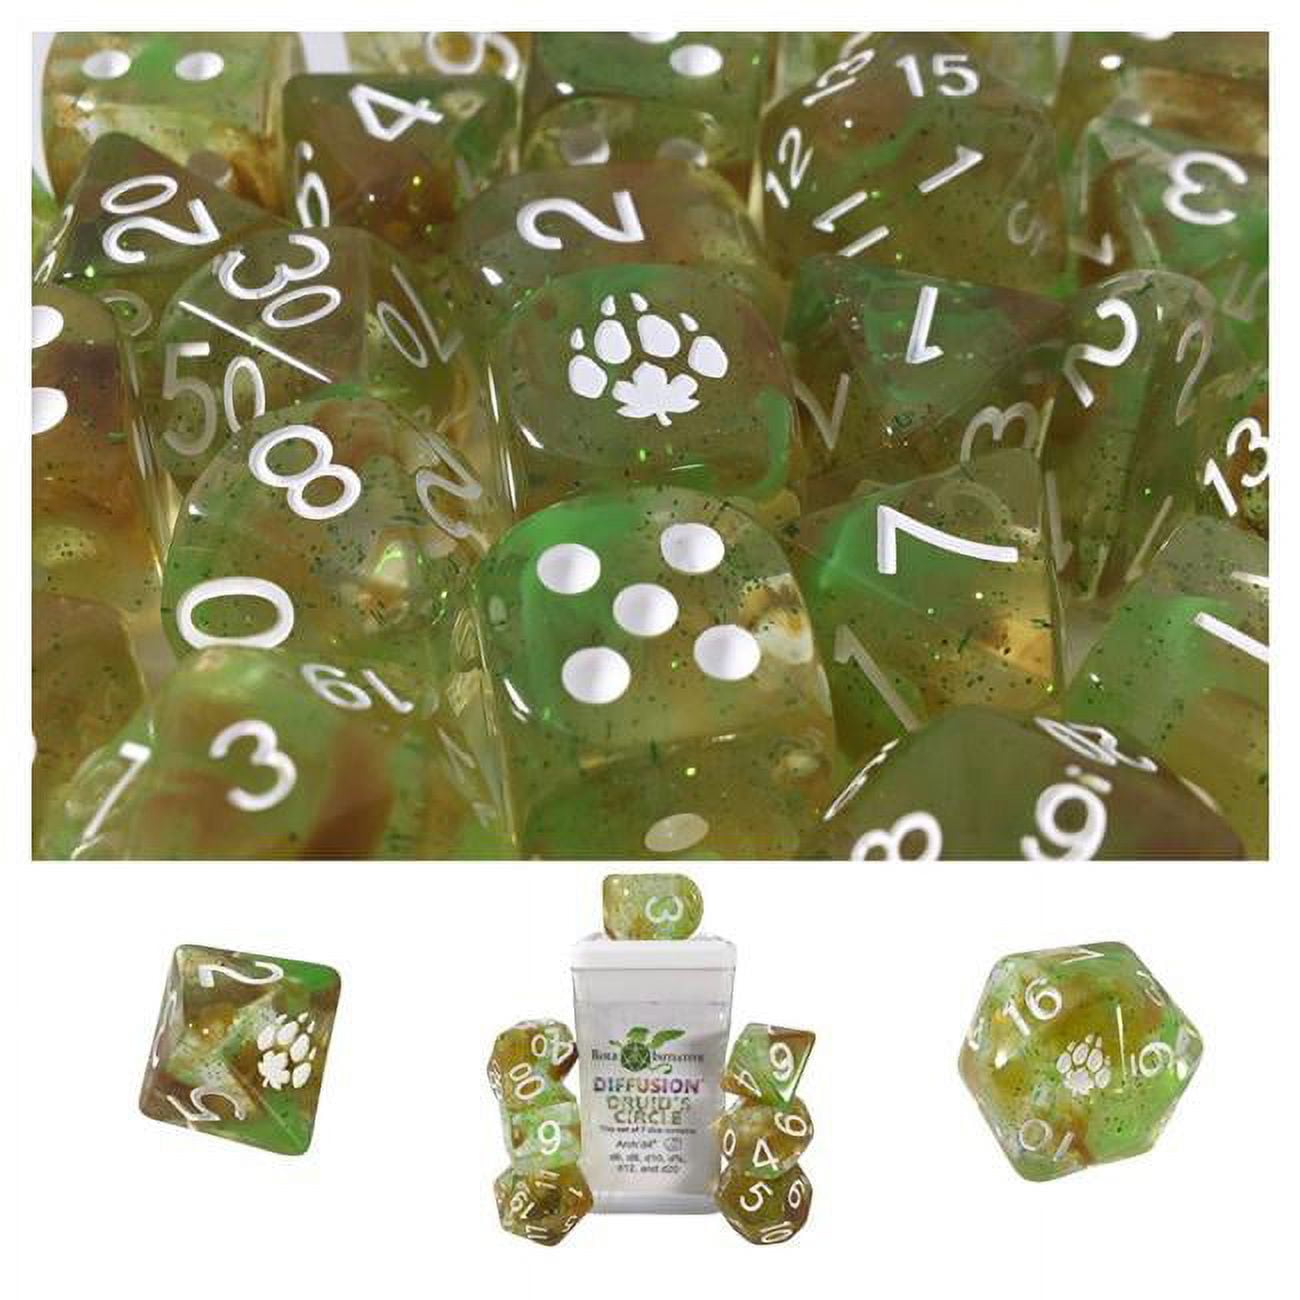 Picture of Role 4 Initiative R4I50524-7C-S Diffusion Druids Circle Dice - Set of 7